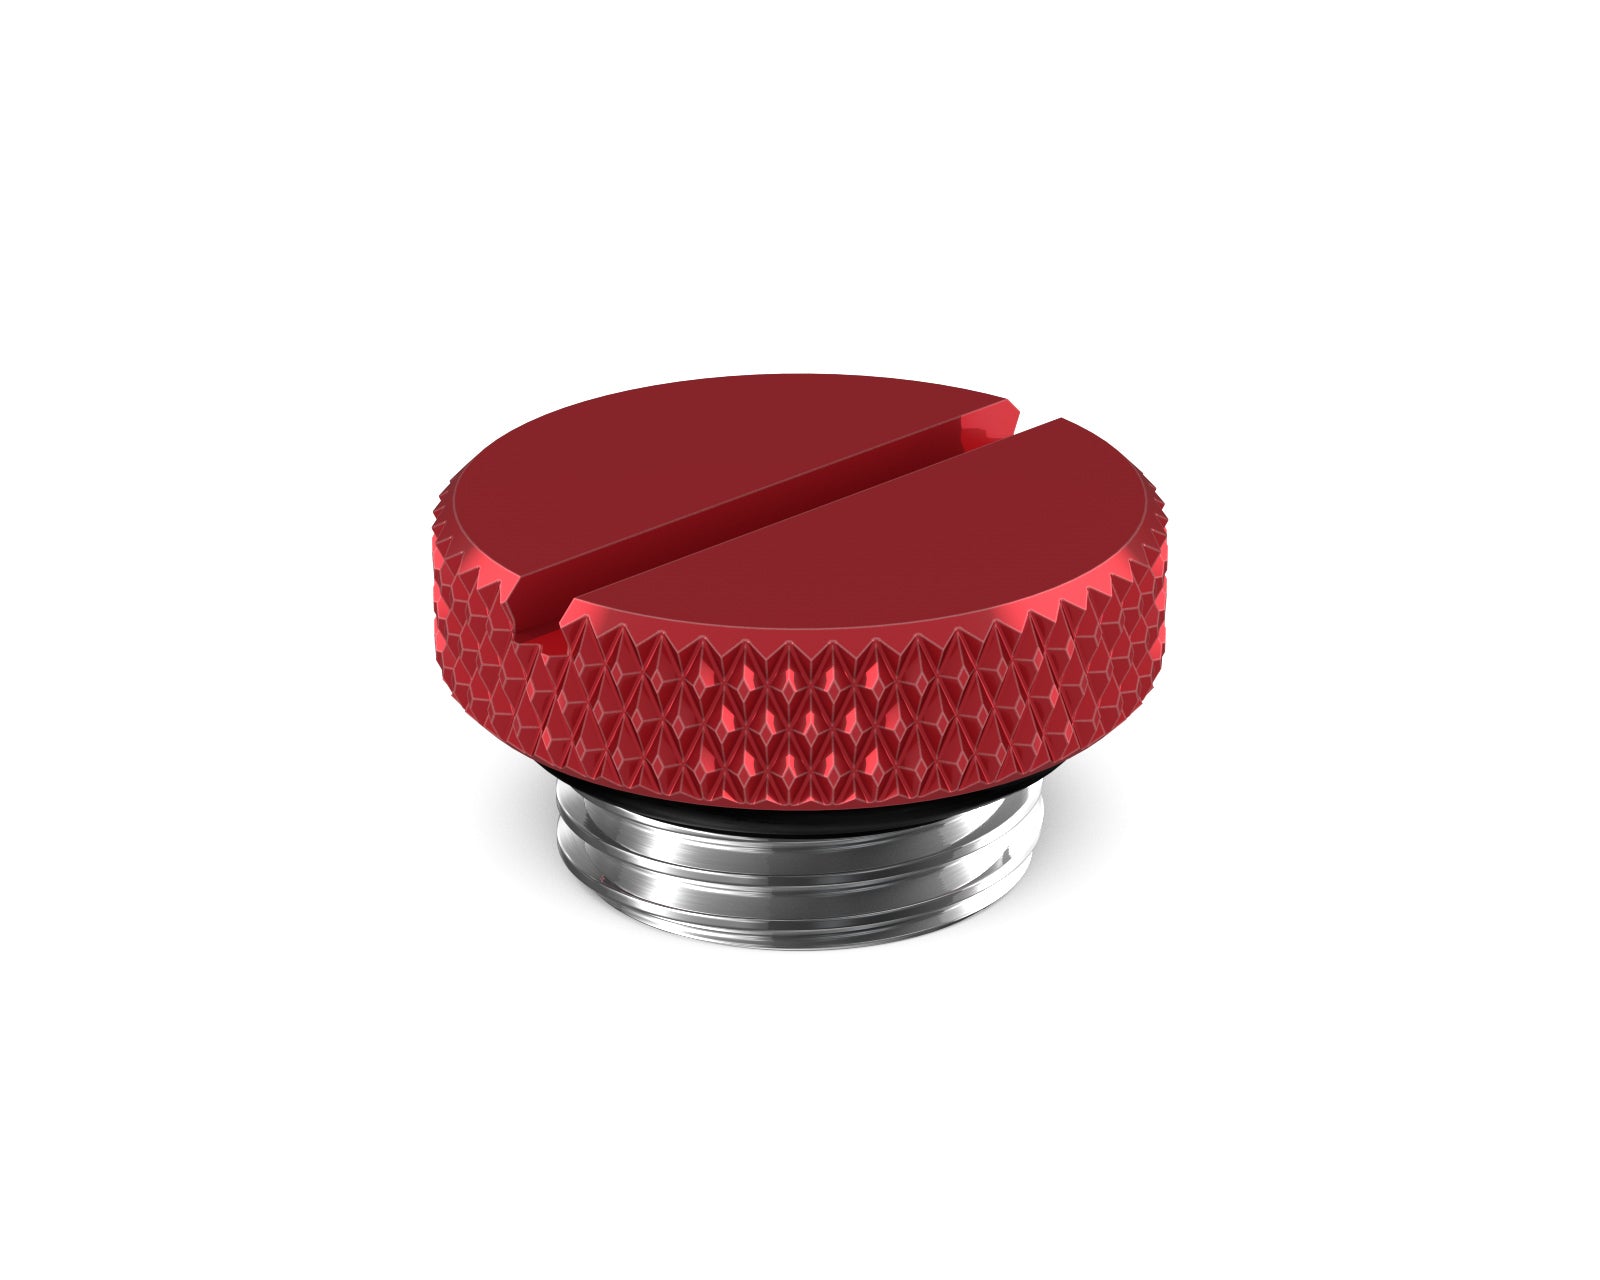 PrimoChill G 1/4in. SX Knurled Slotted Stop Fitting - PrimoChill - KEEPING IT COOL Candy Red